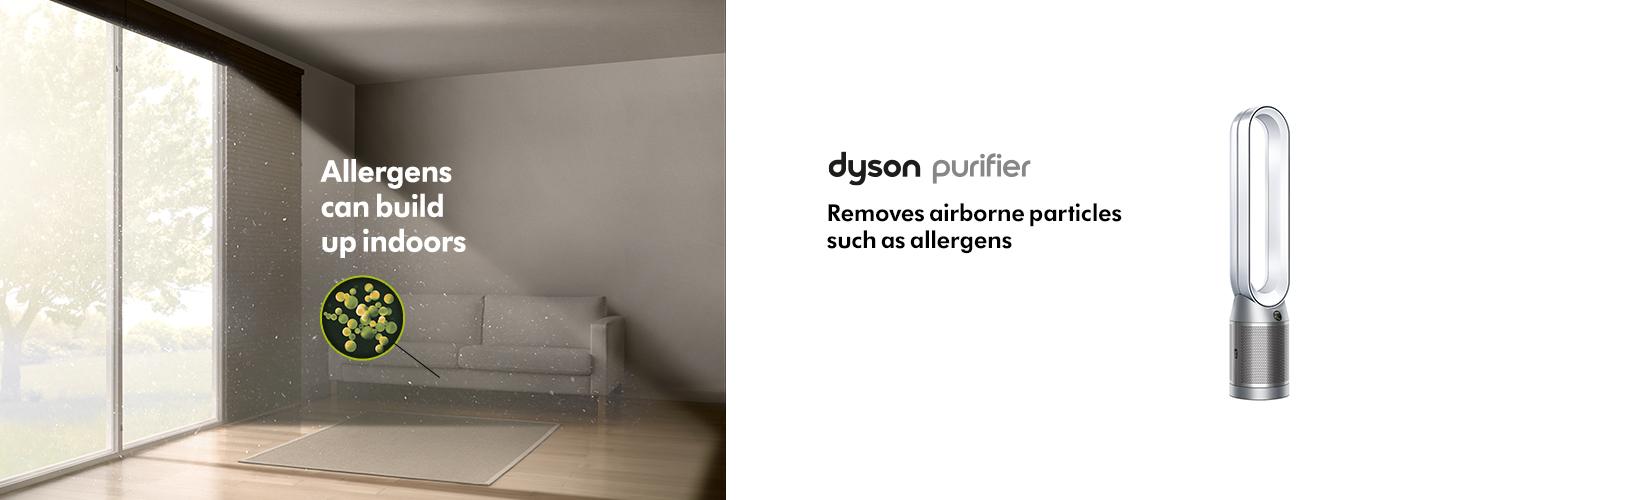 Dyson purifier. Removes airbone particles such as allergens.